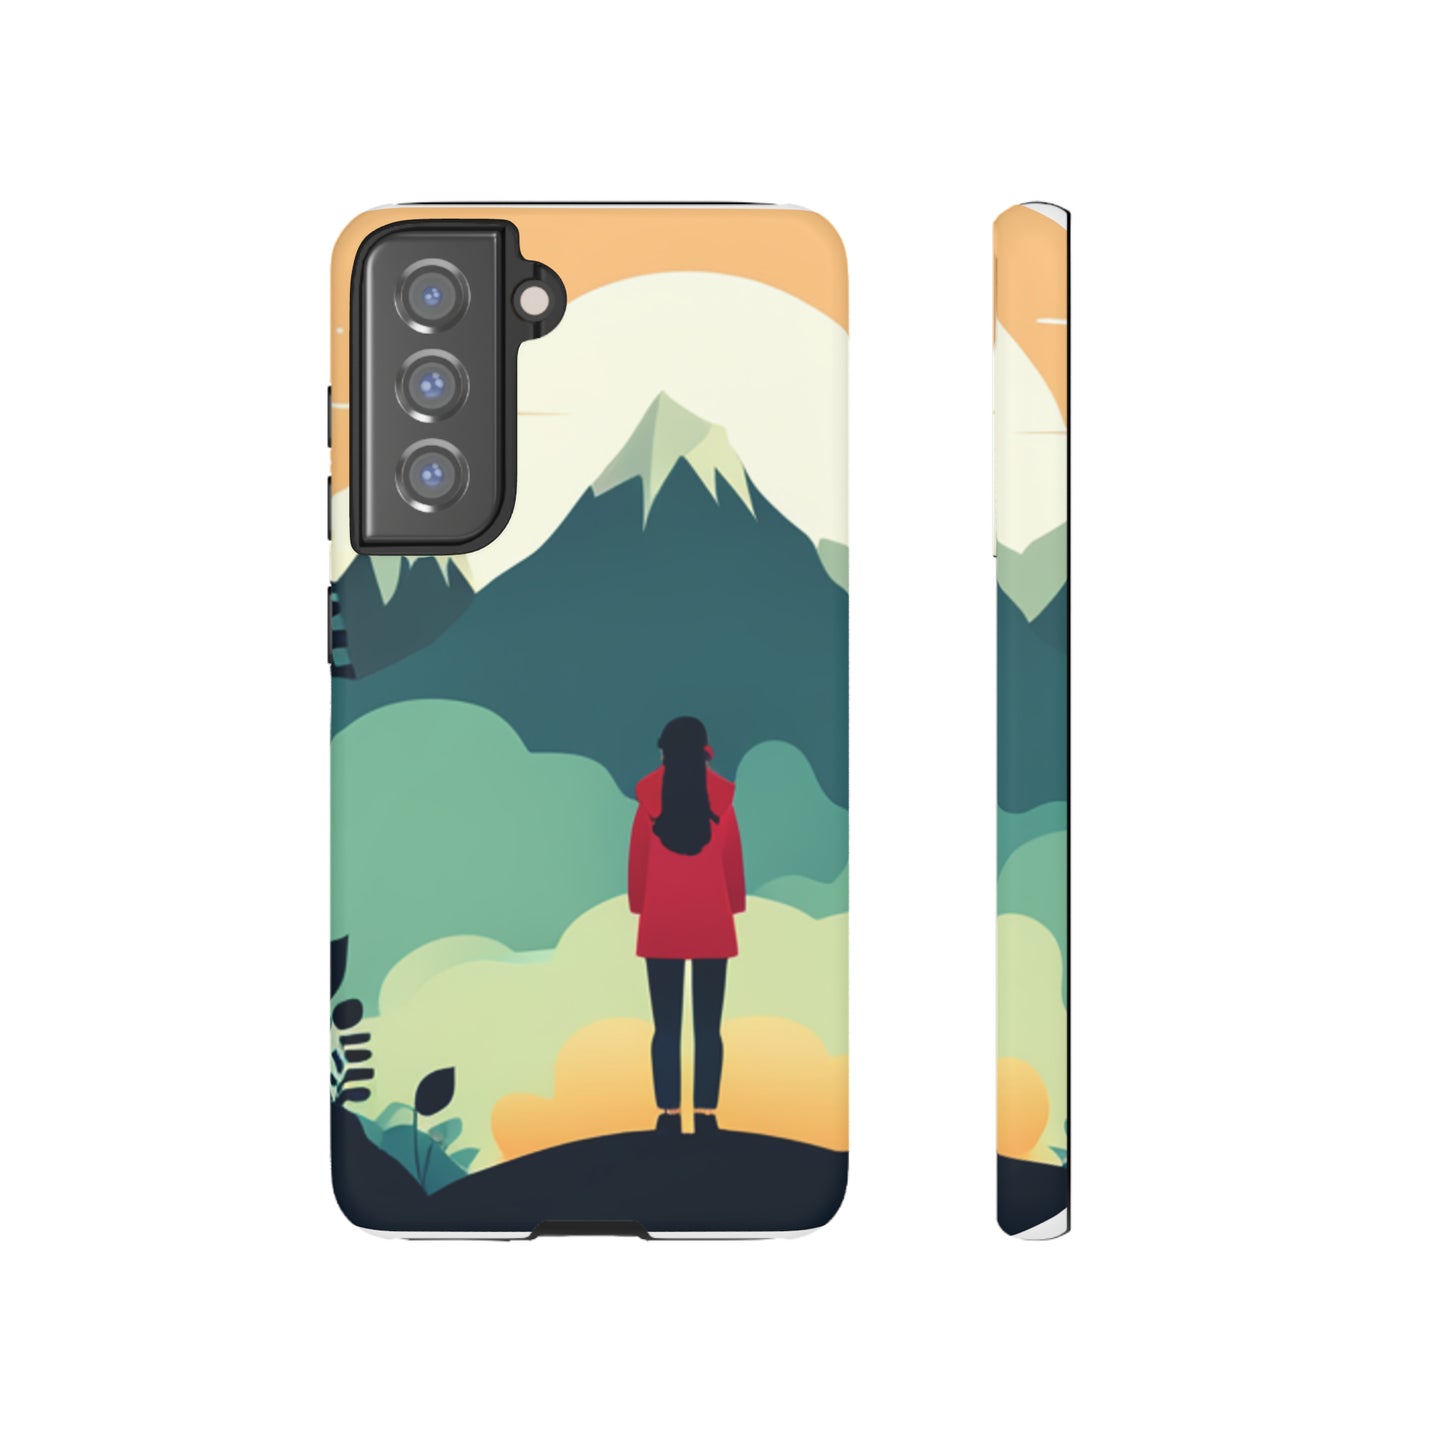 Adventer Seeker Phone Case for iPhones and Androids